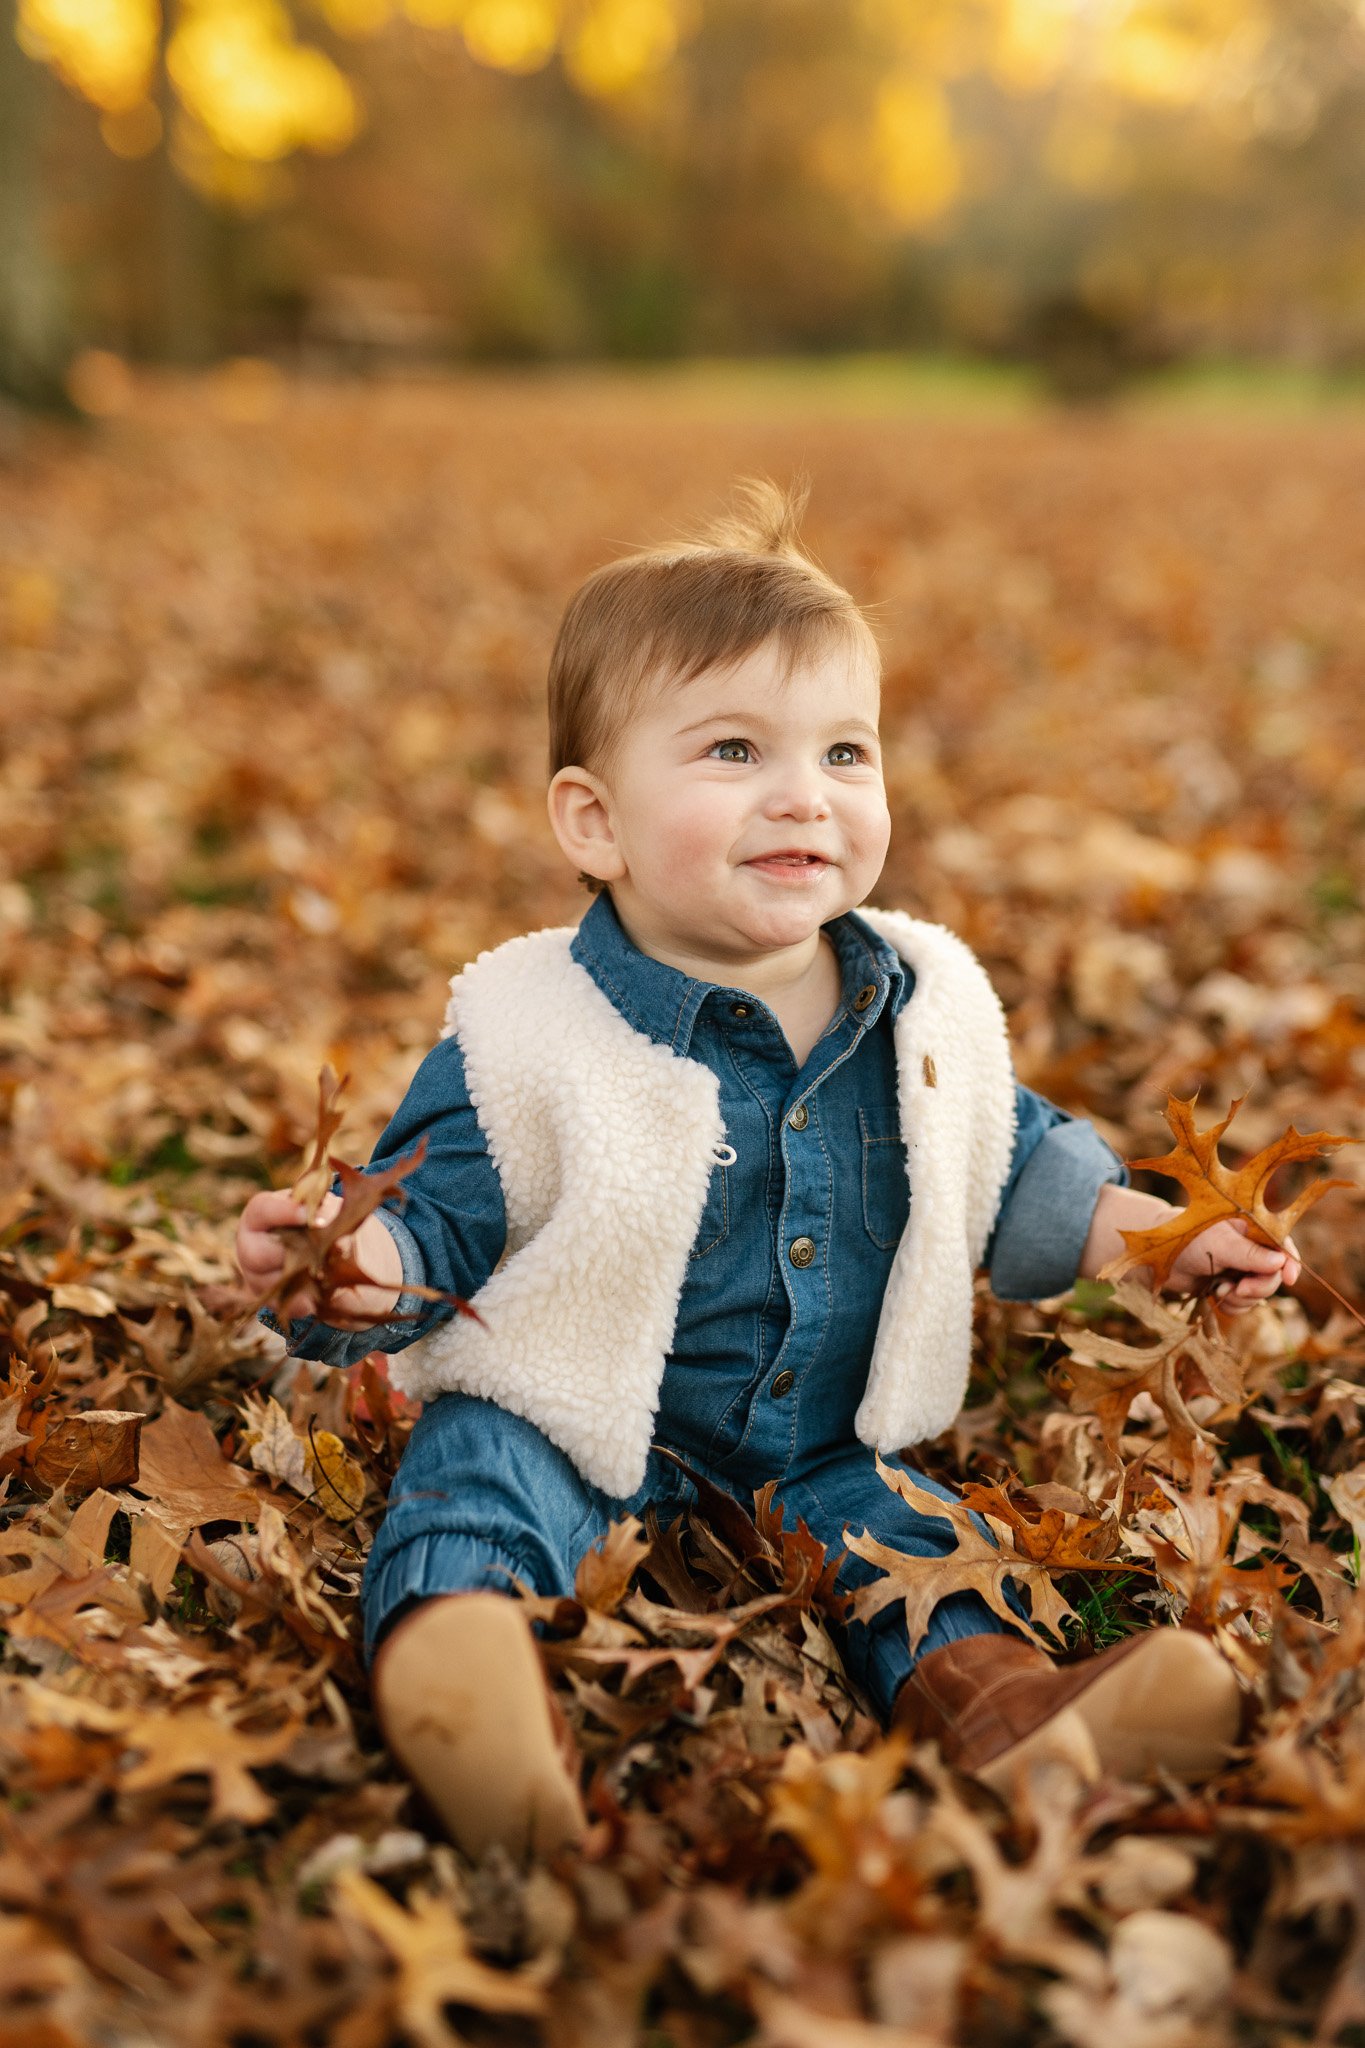  A baby sitting in a pile of leaves in the fall in New Jersey by Nicole Hawkins Photography. fall family pic ideas baby style ideas #NicoleHawkinsPhotography #NicoleHawkinsFamily #fallfamilyphotos #fallphotos #familyphotographerNJ #NJfallfamilypics 